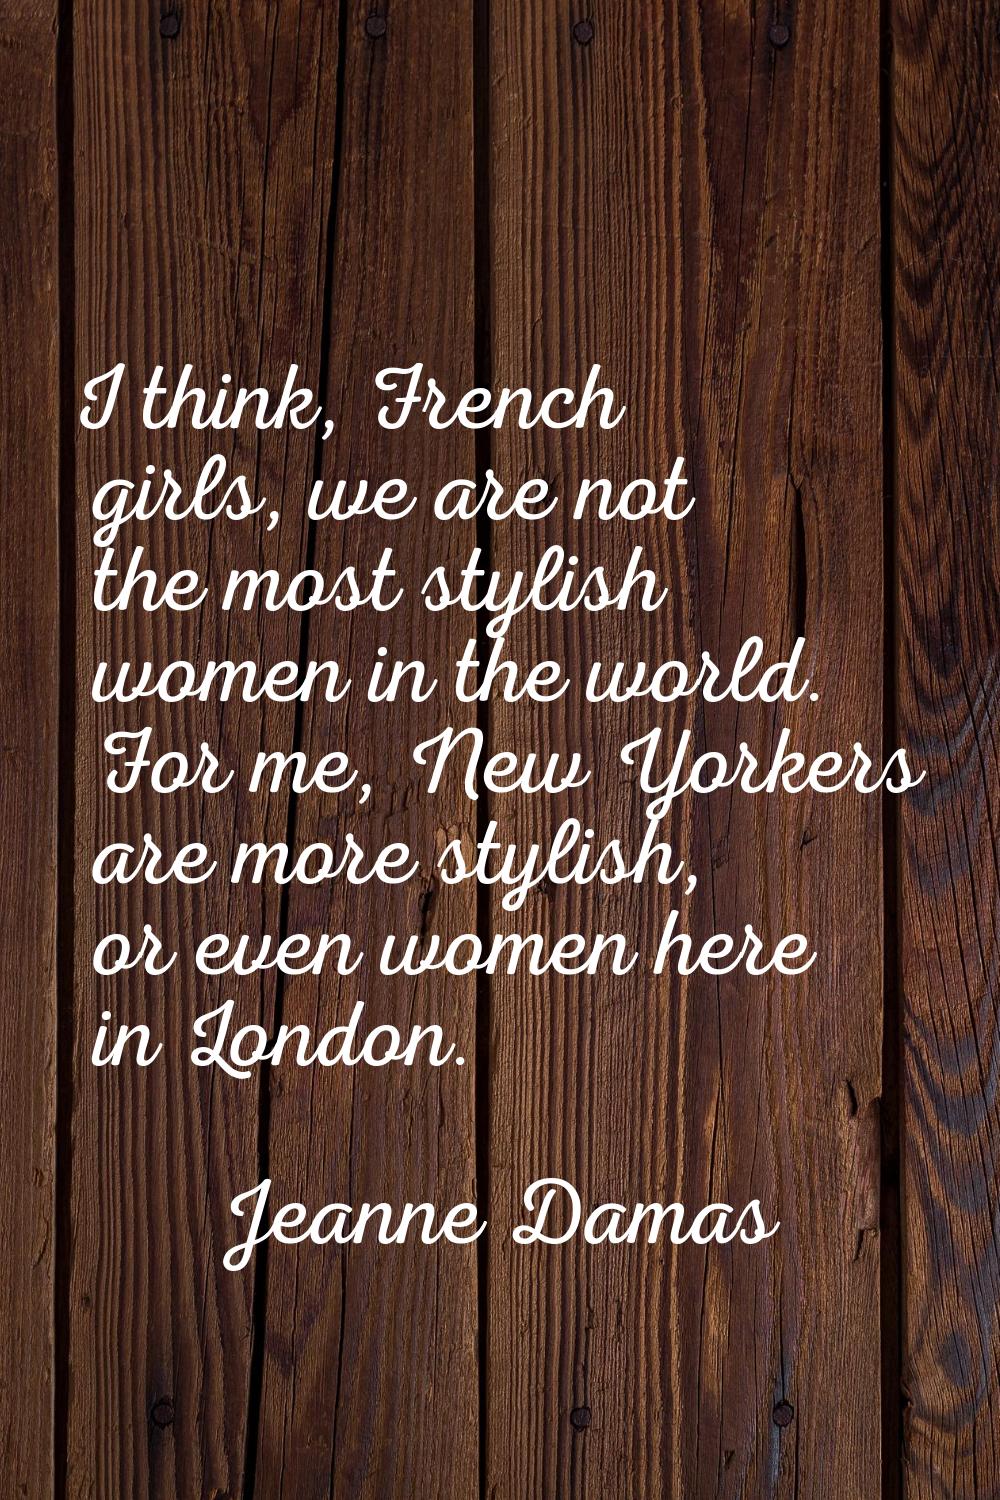 I think, French girls, we are not the most stylish women in the world. For me, New Yorkers are more